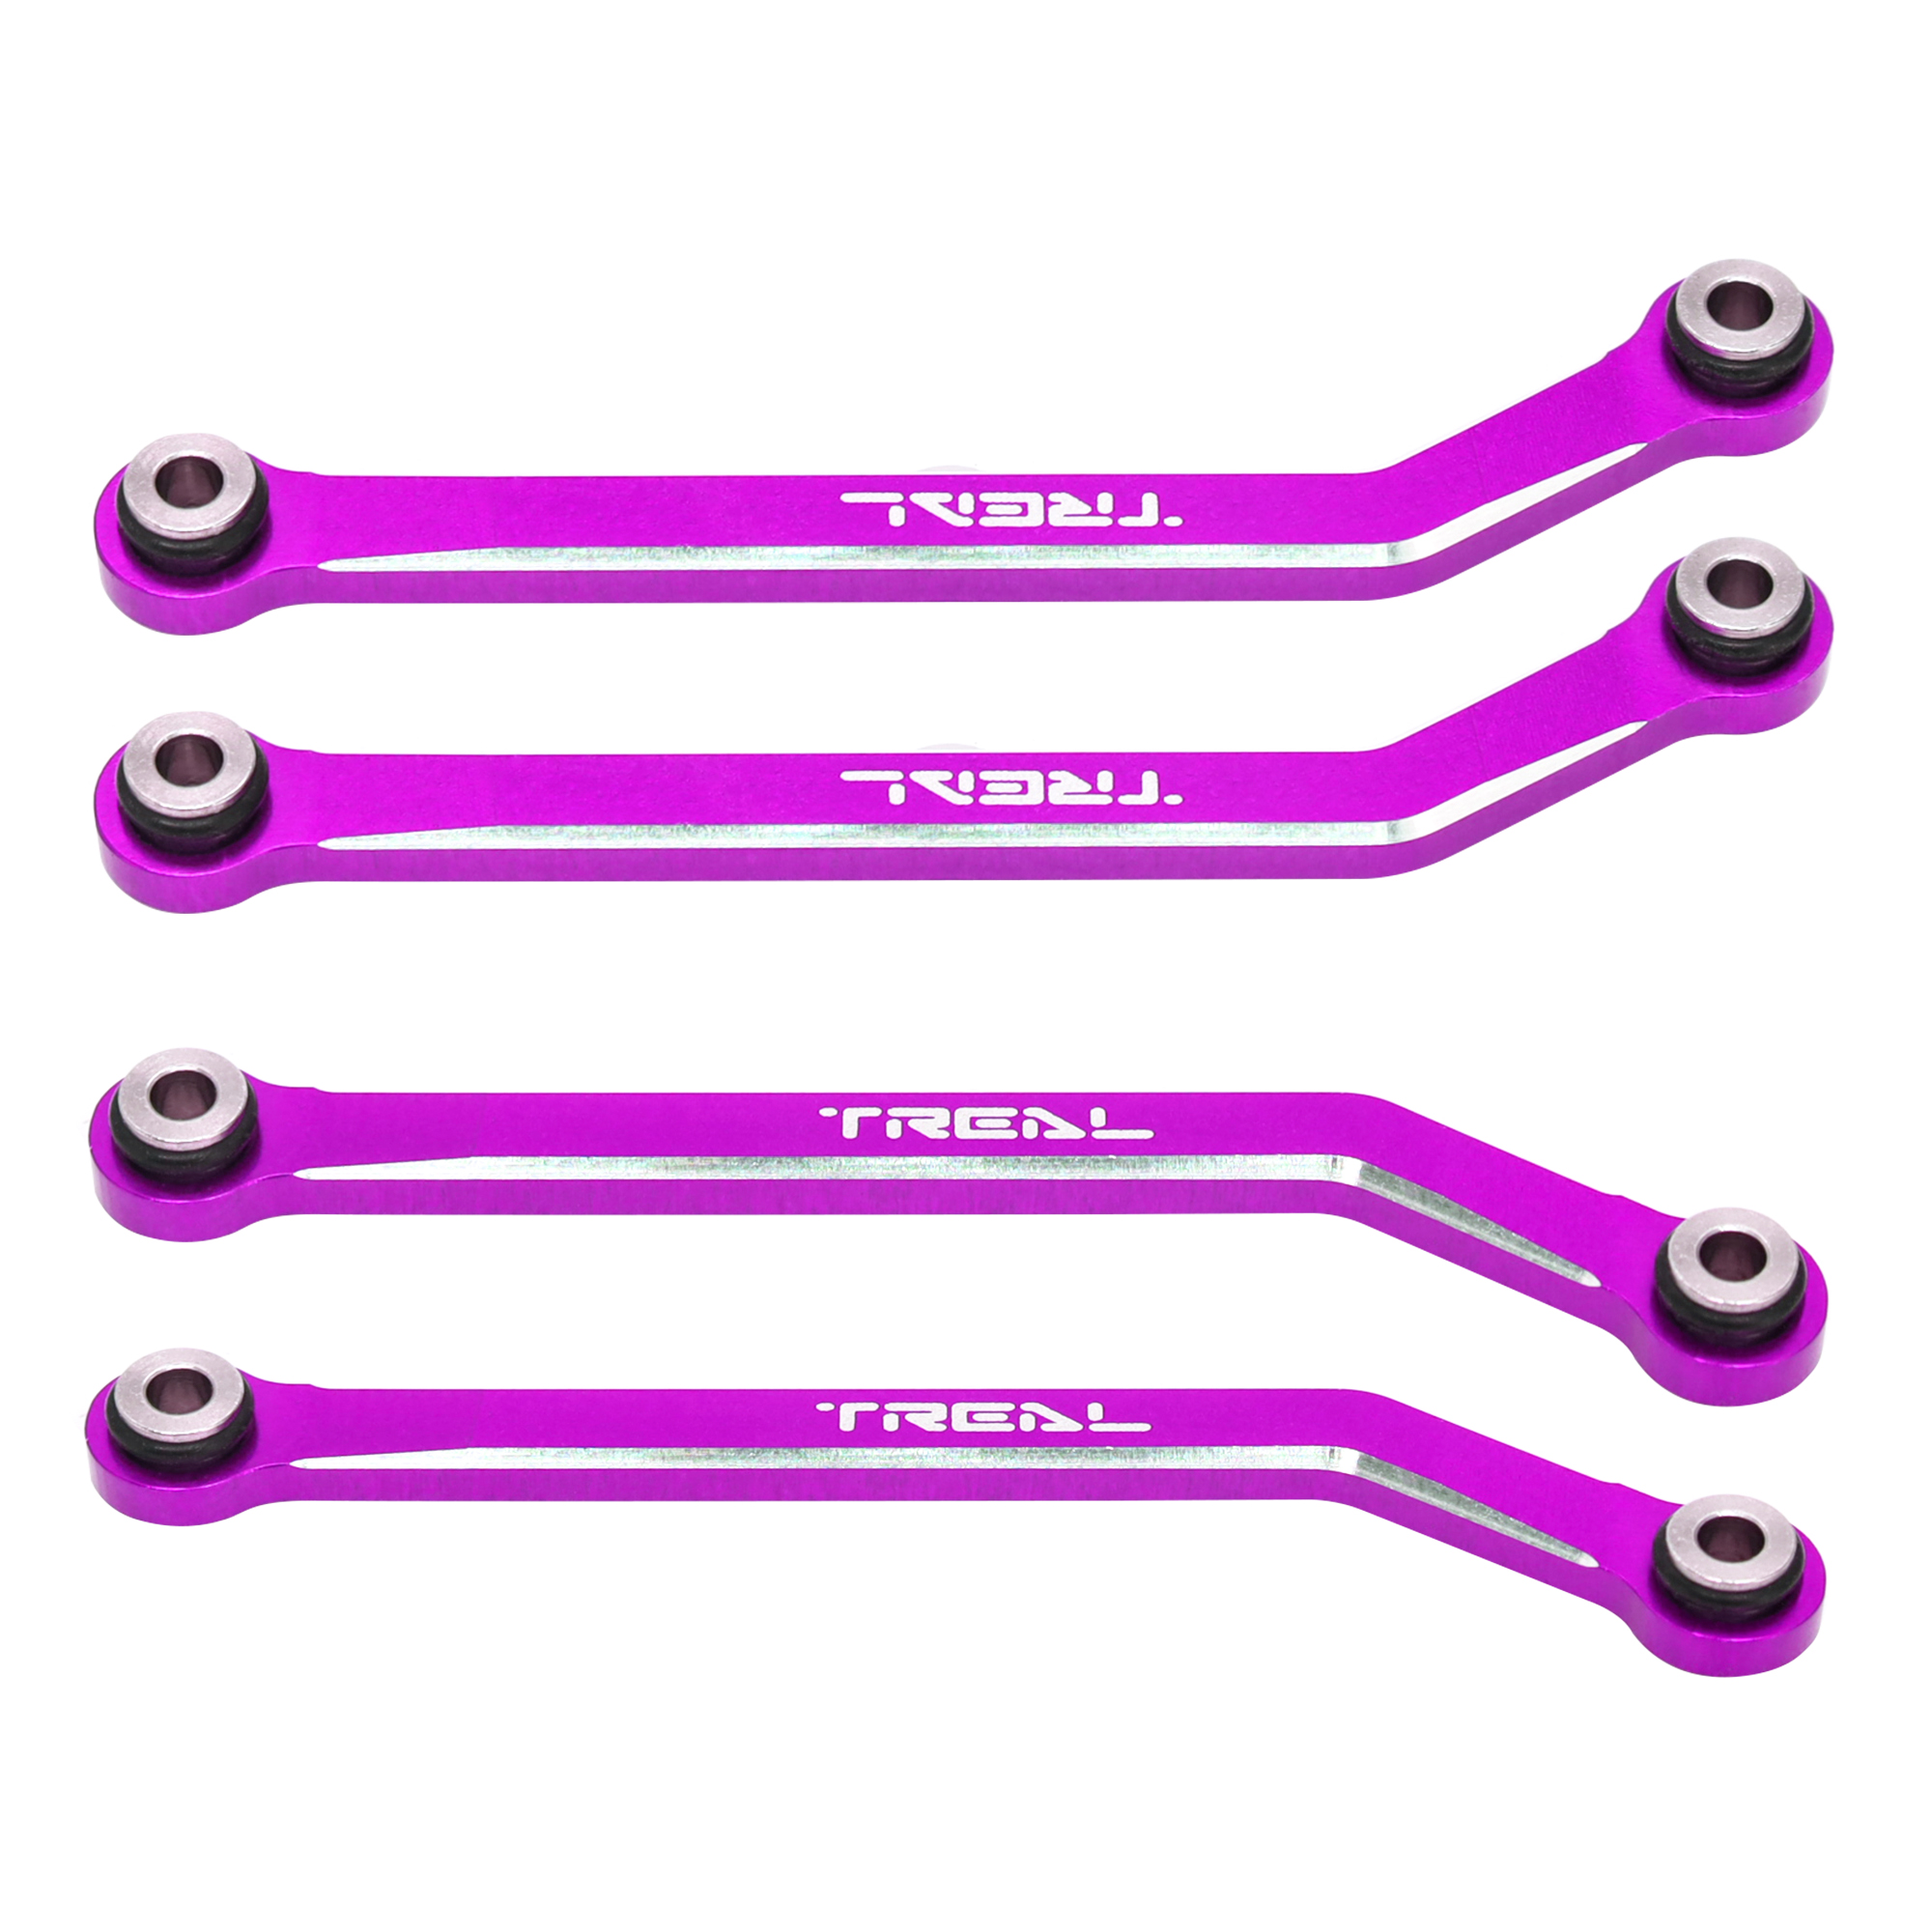 TREAL FCX24 High Clearance Links, Aluminum 7075 Chassis Lower